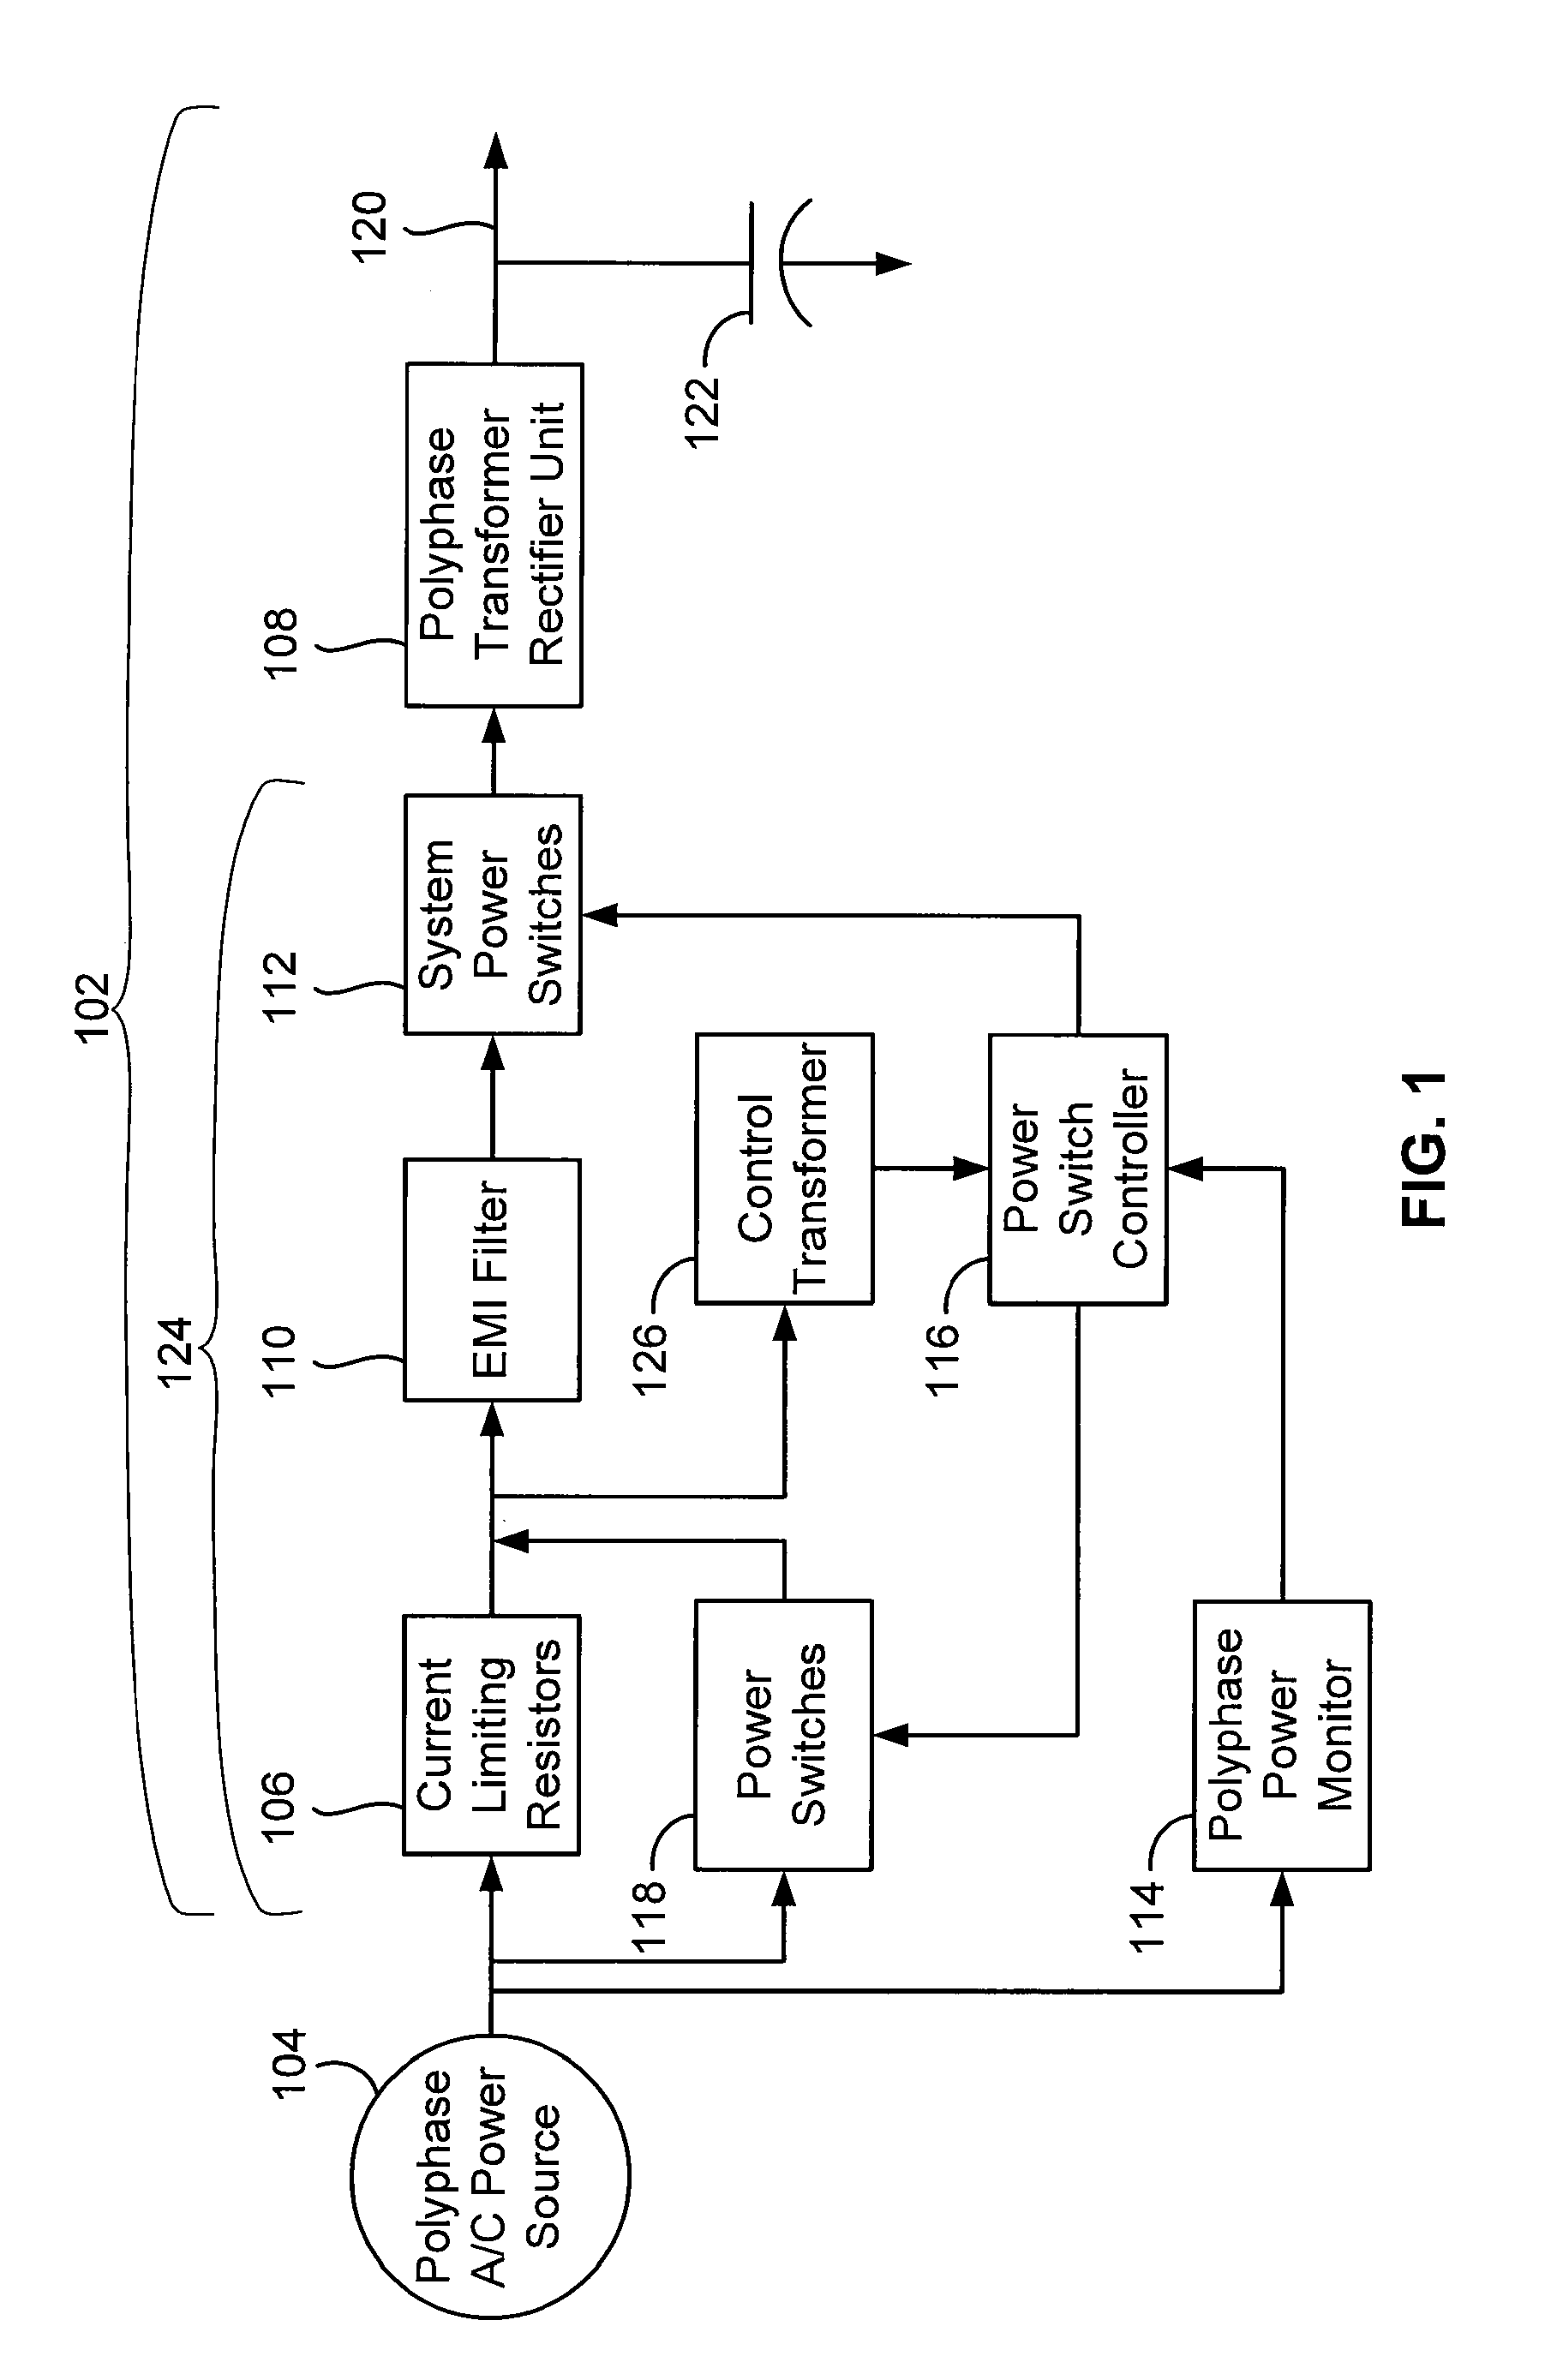 Systems and methods for polyphase alternating current transformer inrush current limiting